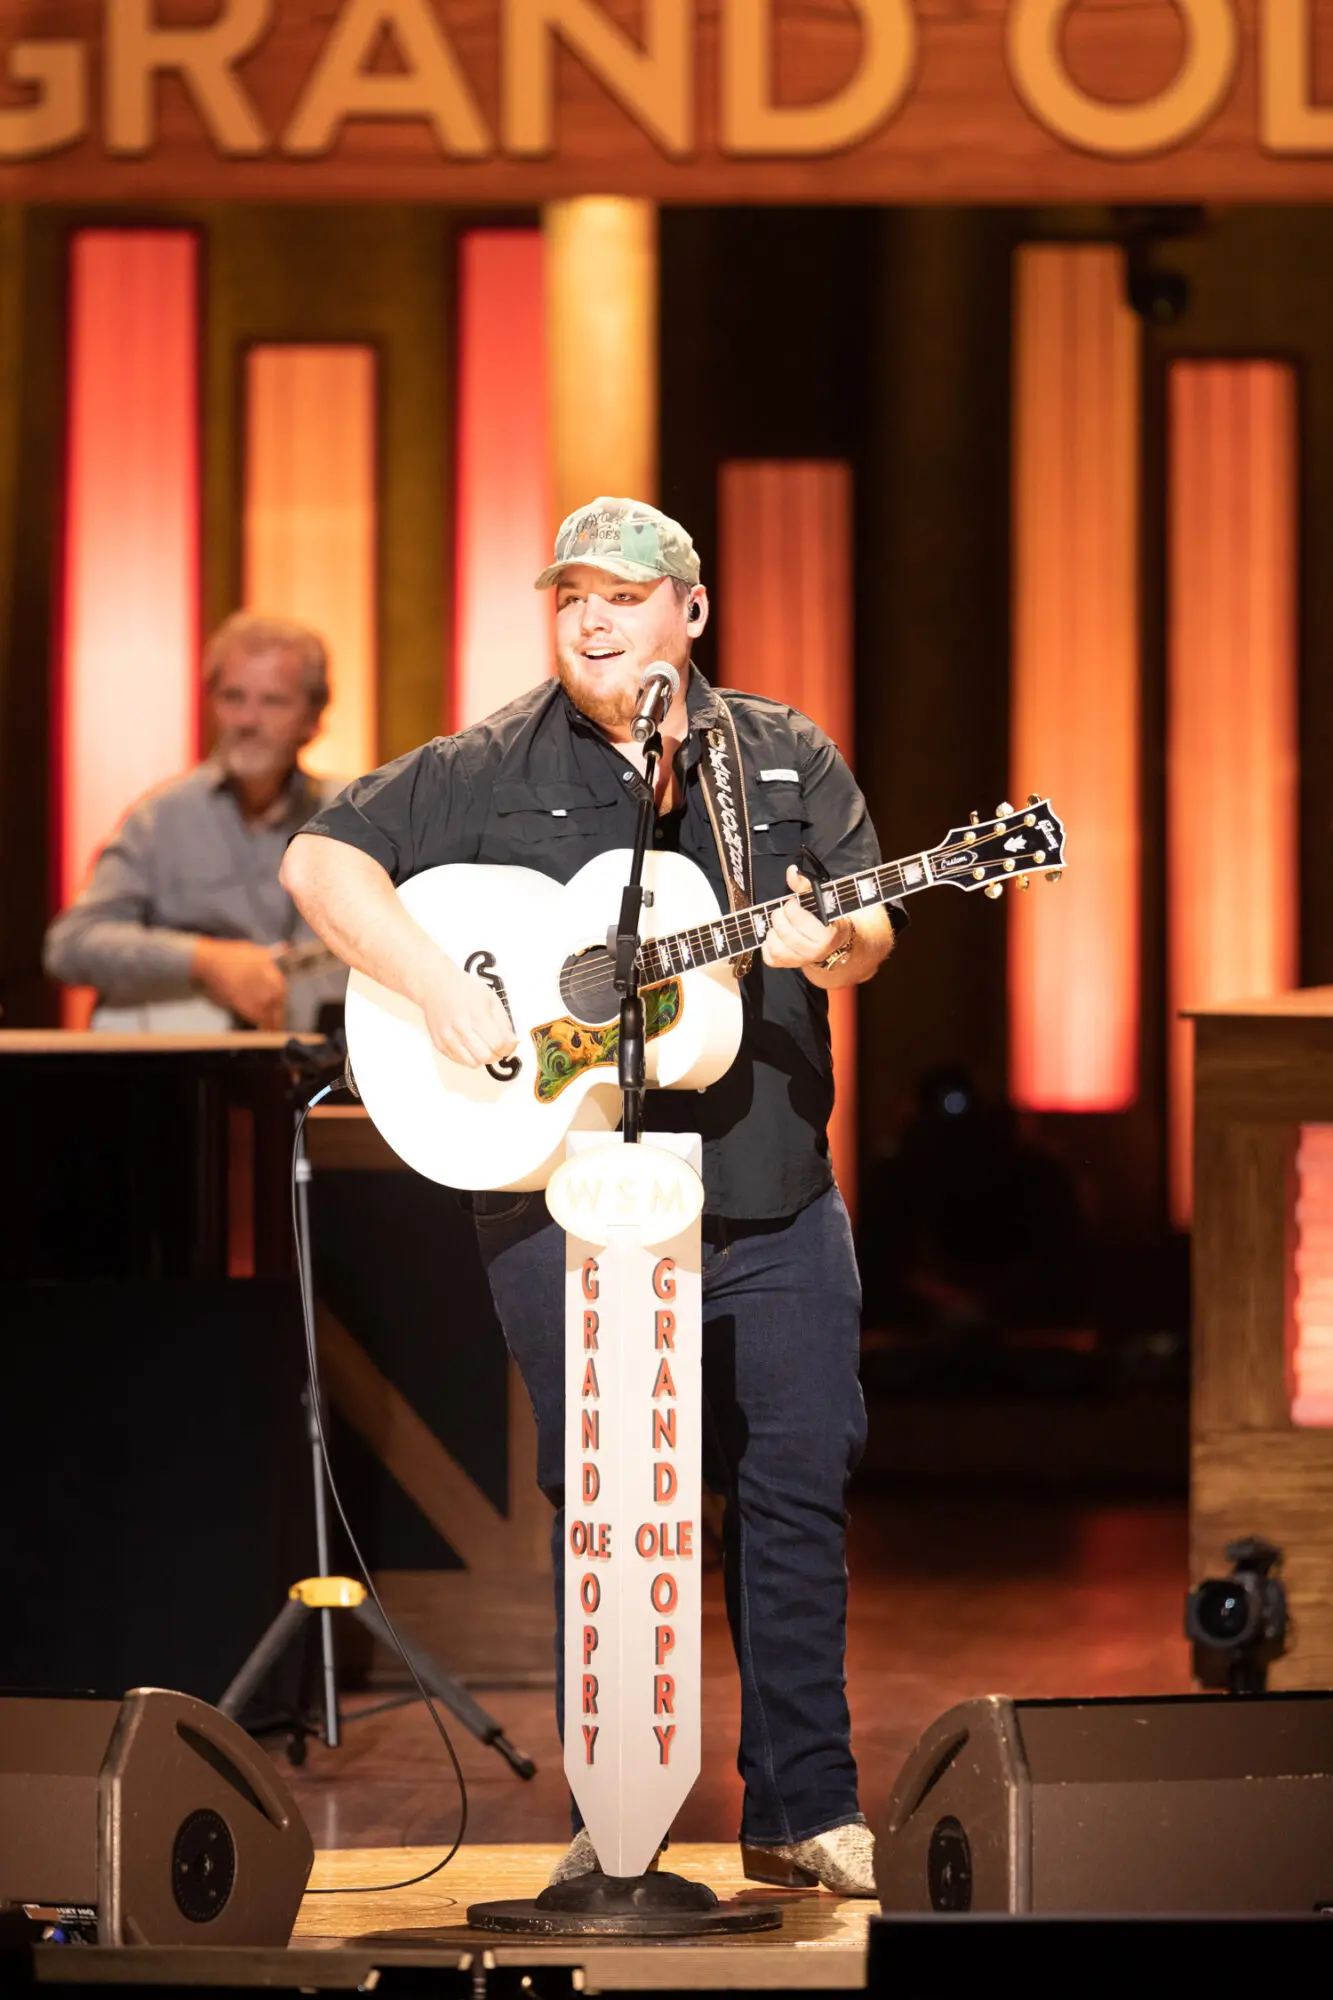 Luke Combs at the Grand Ole Opry, photo Photo By: Chris Hollo